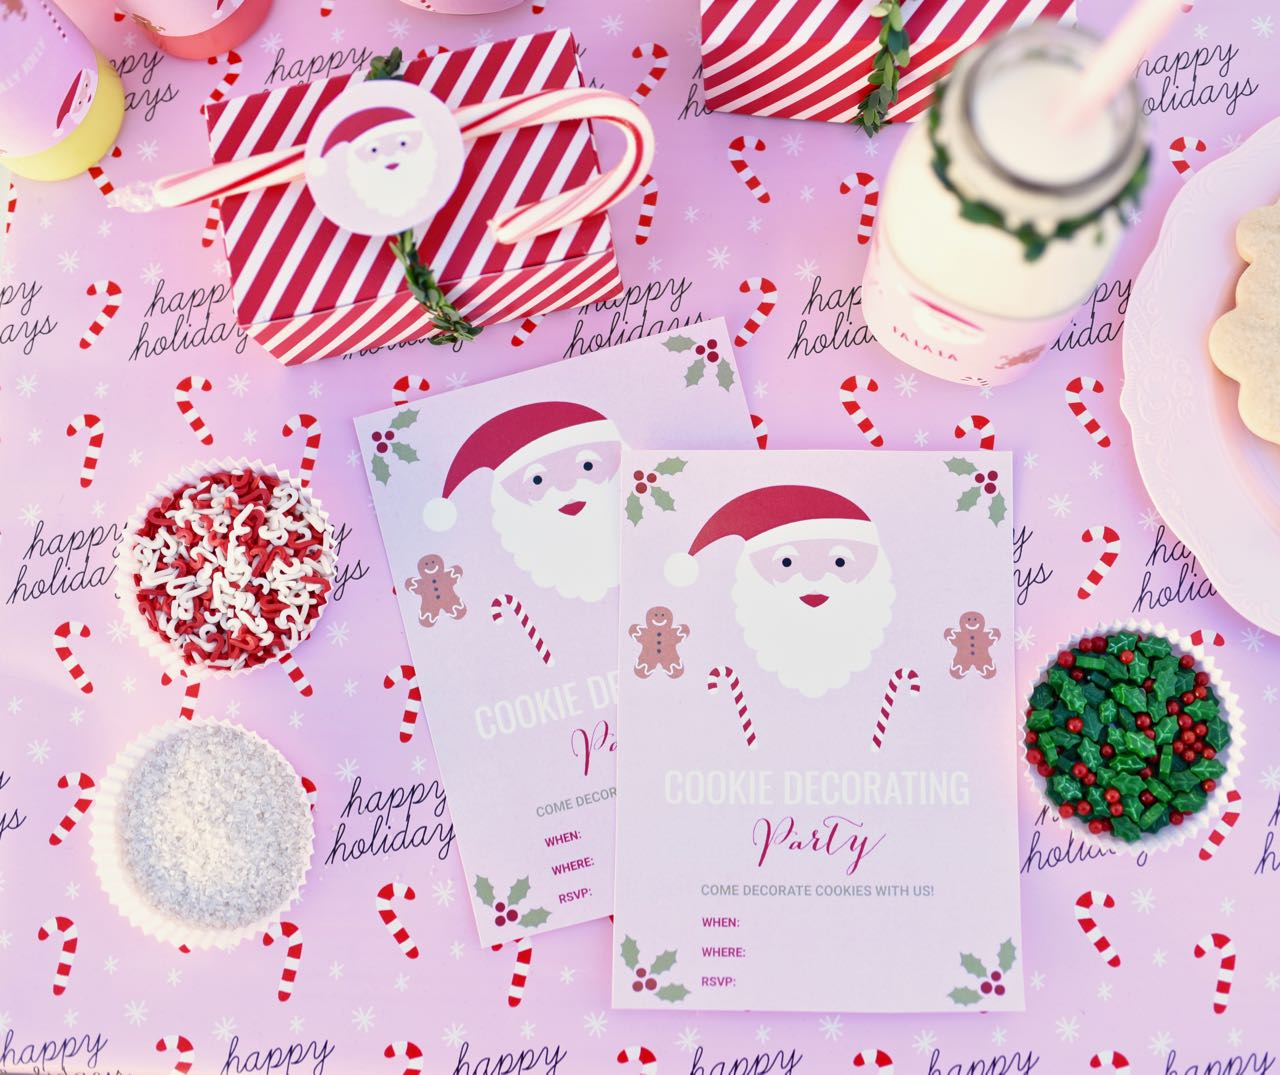 How To Plan The Ultimate Christmas Cookie Decorating Party - Free Printable Cookie Decorating Invitations